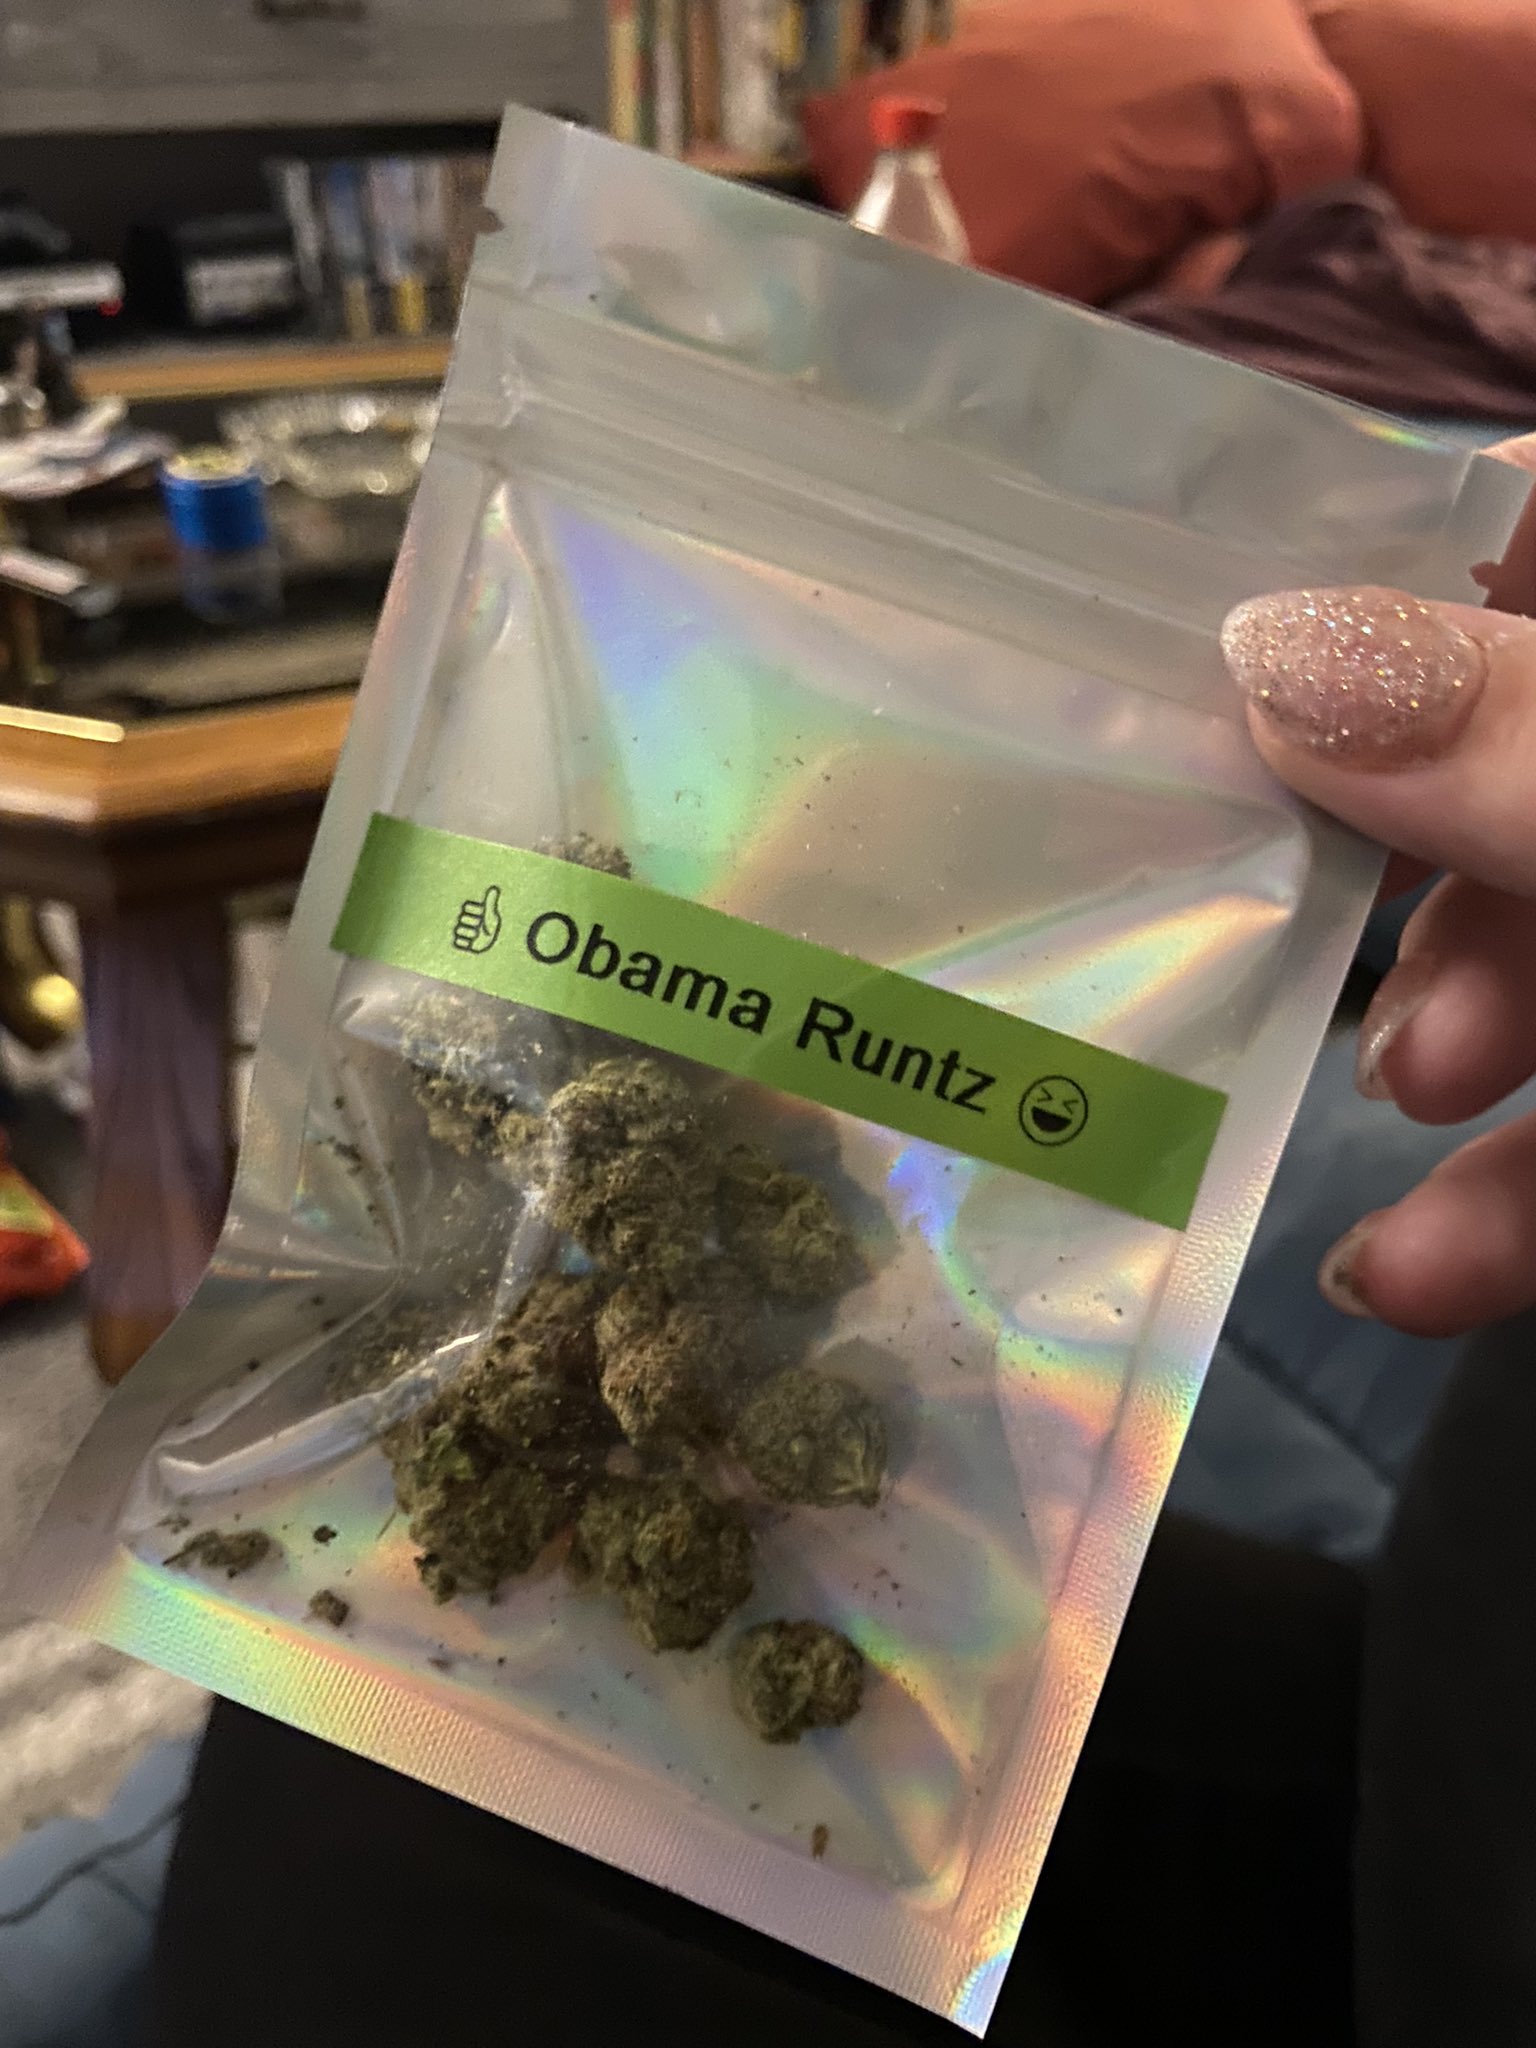 Ridiculously Offensive Weed Strain Bags - Obama Runtz